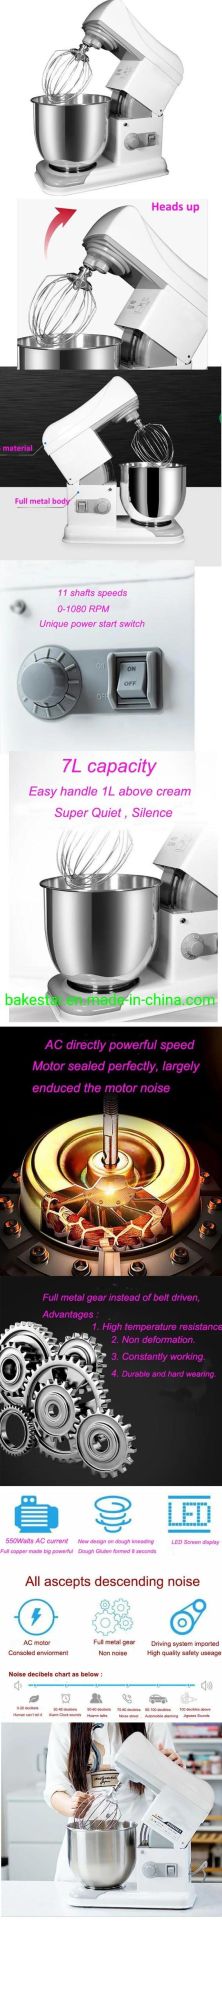 Kitchen Planetary Bakery Machine Aid Cake Mixer for Baking Sale Price, Commercial Stand Mixer Cake Food Processor Mixing